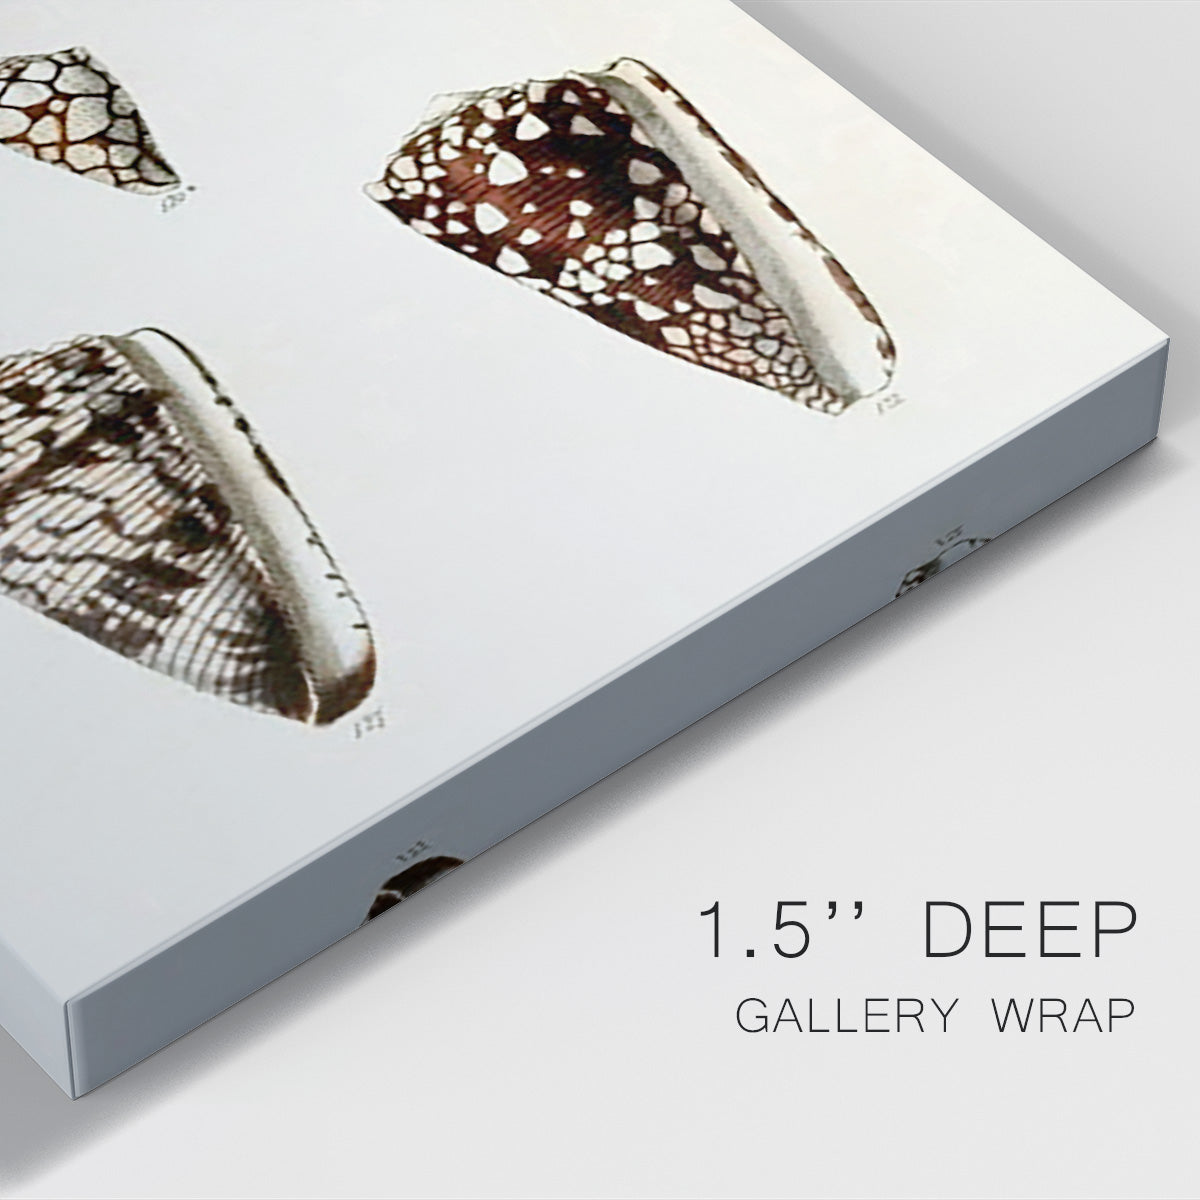 Cone Shell Collection III Premium Gallery Wrapped Canvas - Ready to Hang